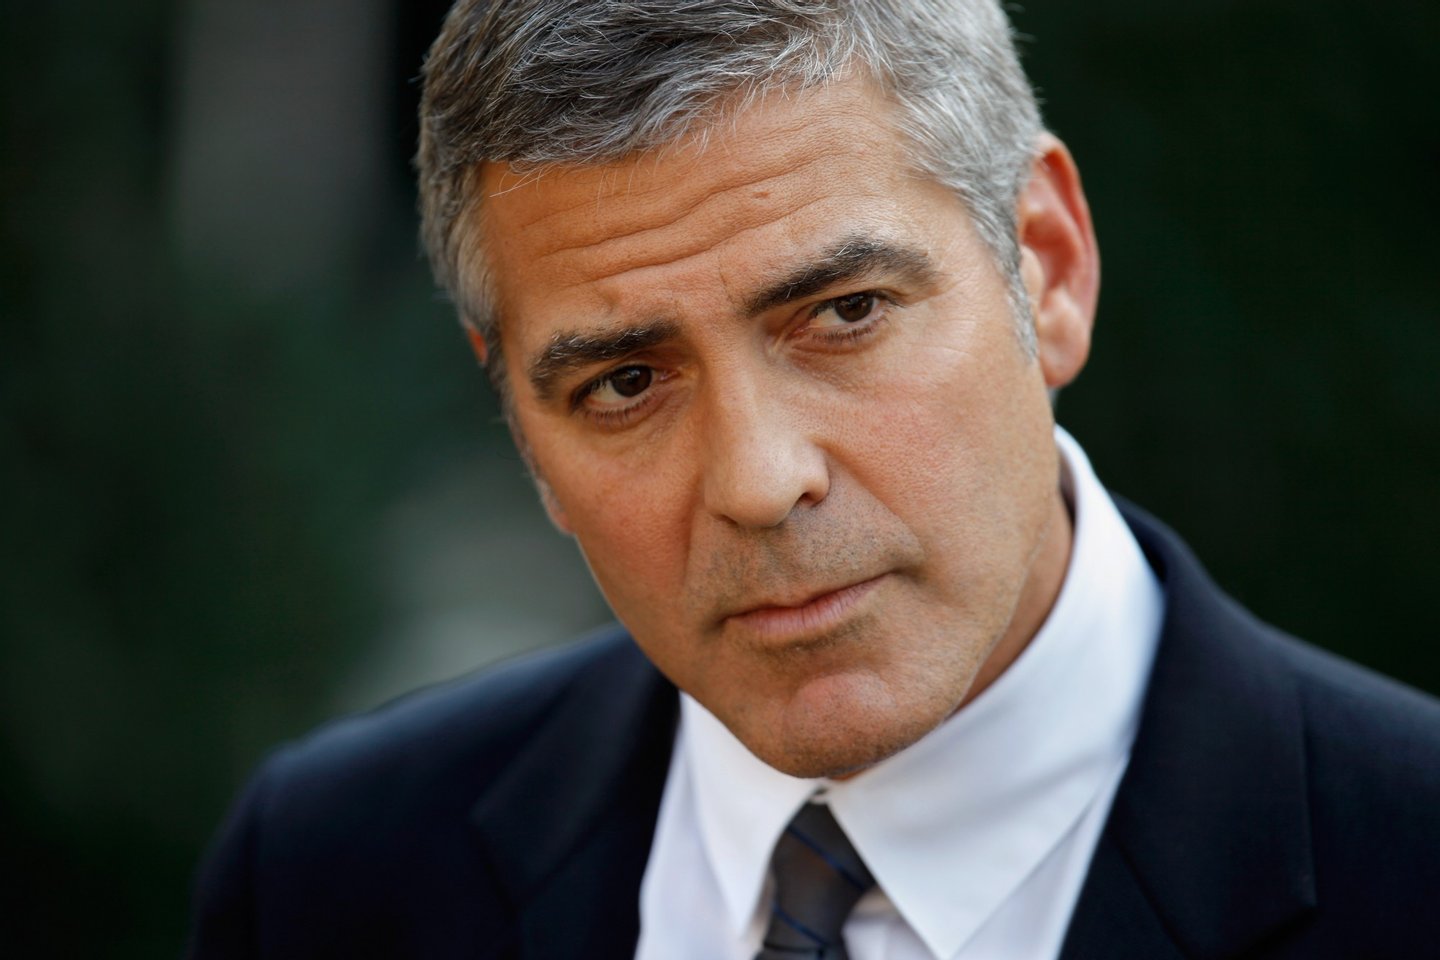 WASHINGTON - OCTOBER 12: Oscar-nominated actor, screen-writer and director George Clooney answers reporters' questions after meeting with U.S. President Barack Obama at the White House October 12, 2010 in Washington, DC. Clooney and human rights activist and co-founder of the Enough Project John Prendergast met with Obama to discuss their recent trip to Sudan and the threat there of a war ahead of a referendum election. (Photo by Chip Somodevilla/Getty Images)